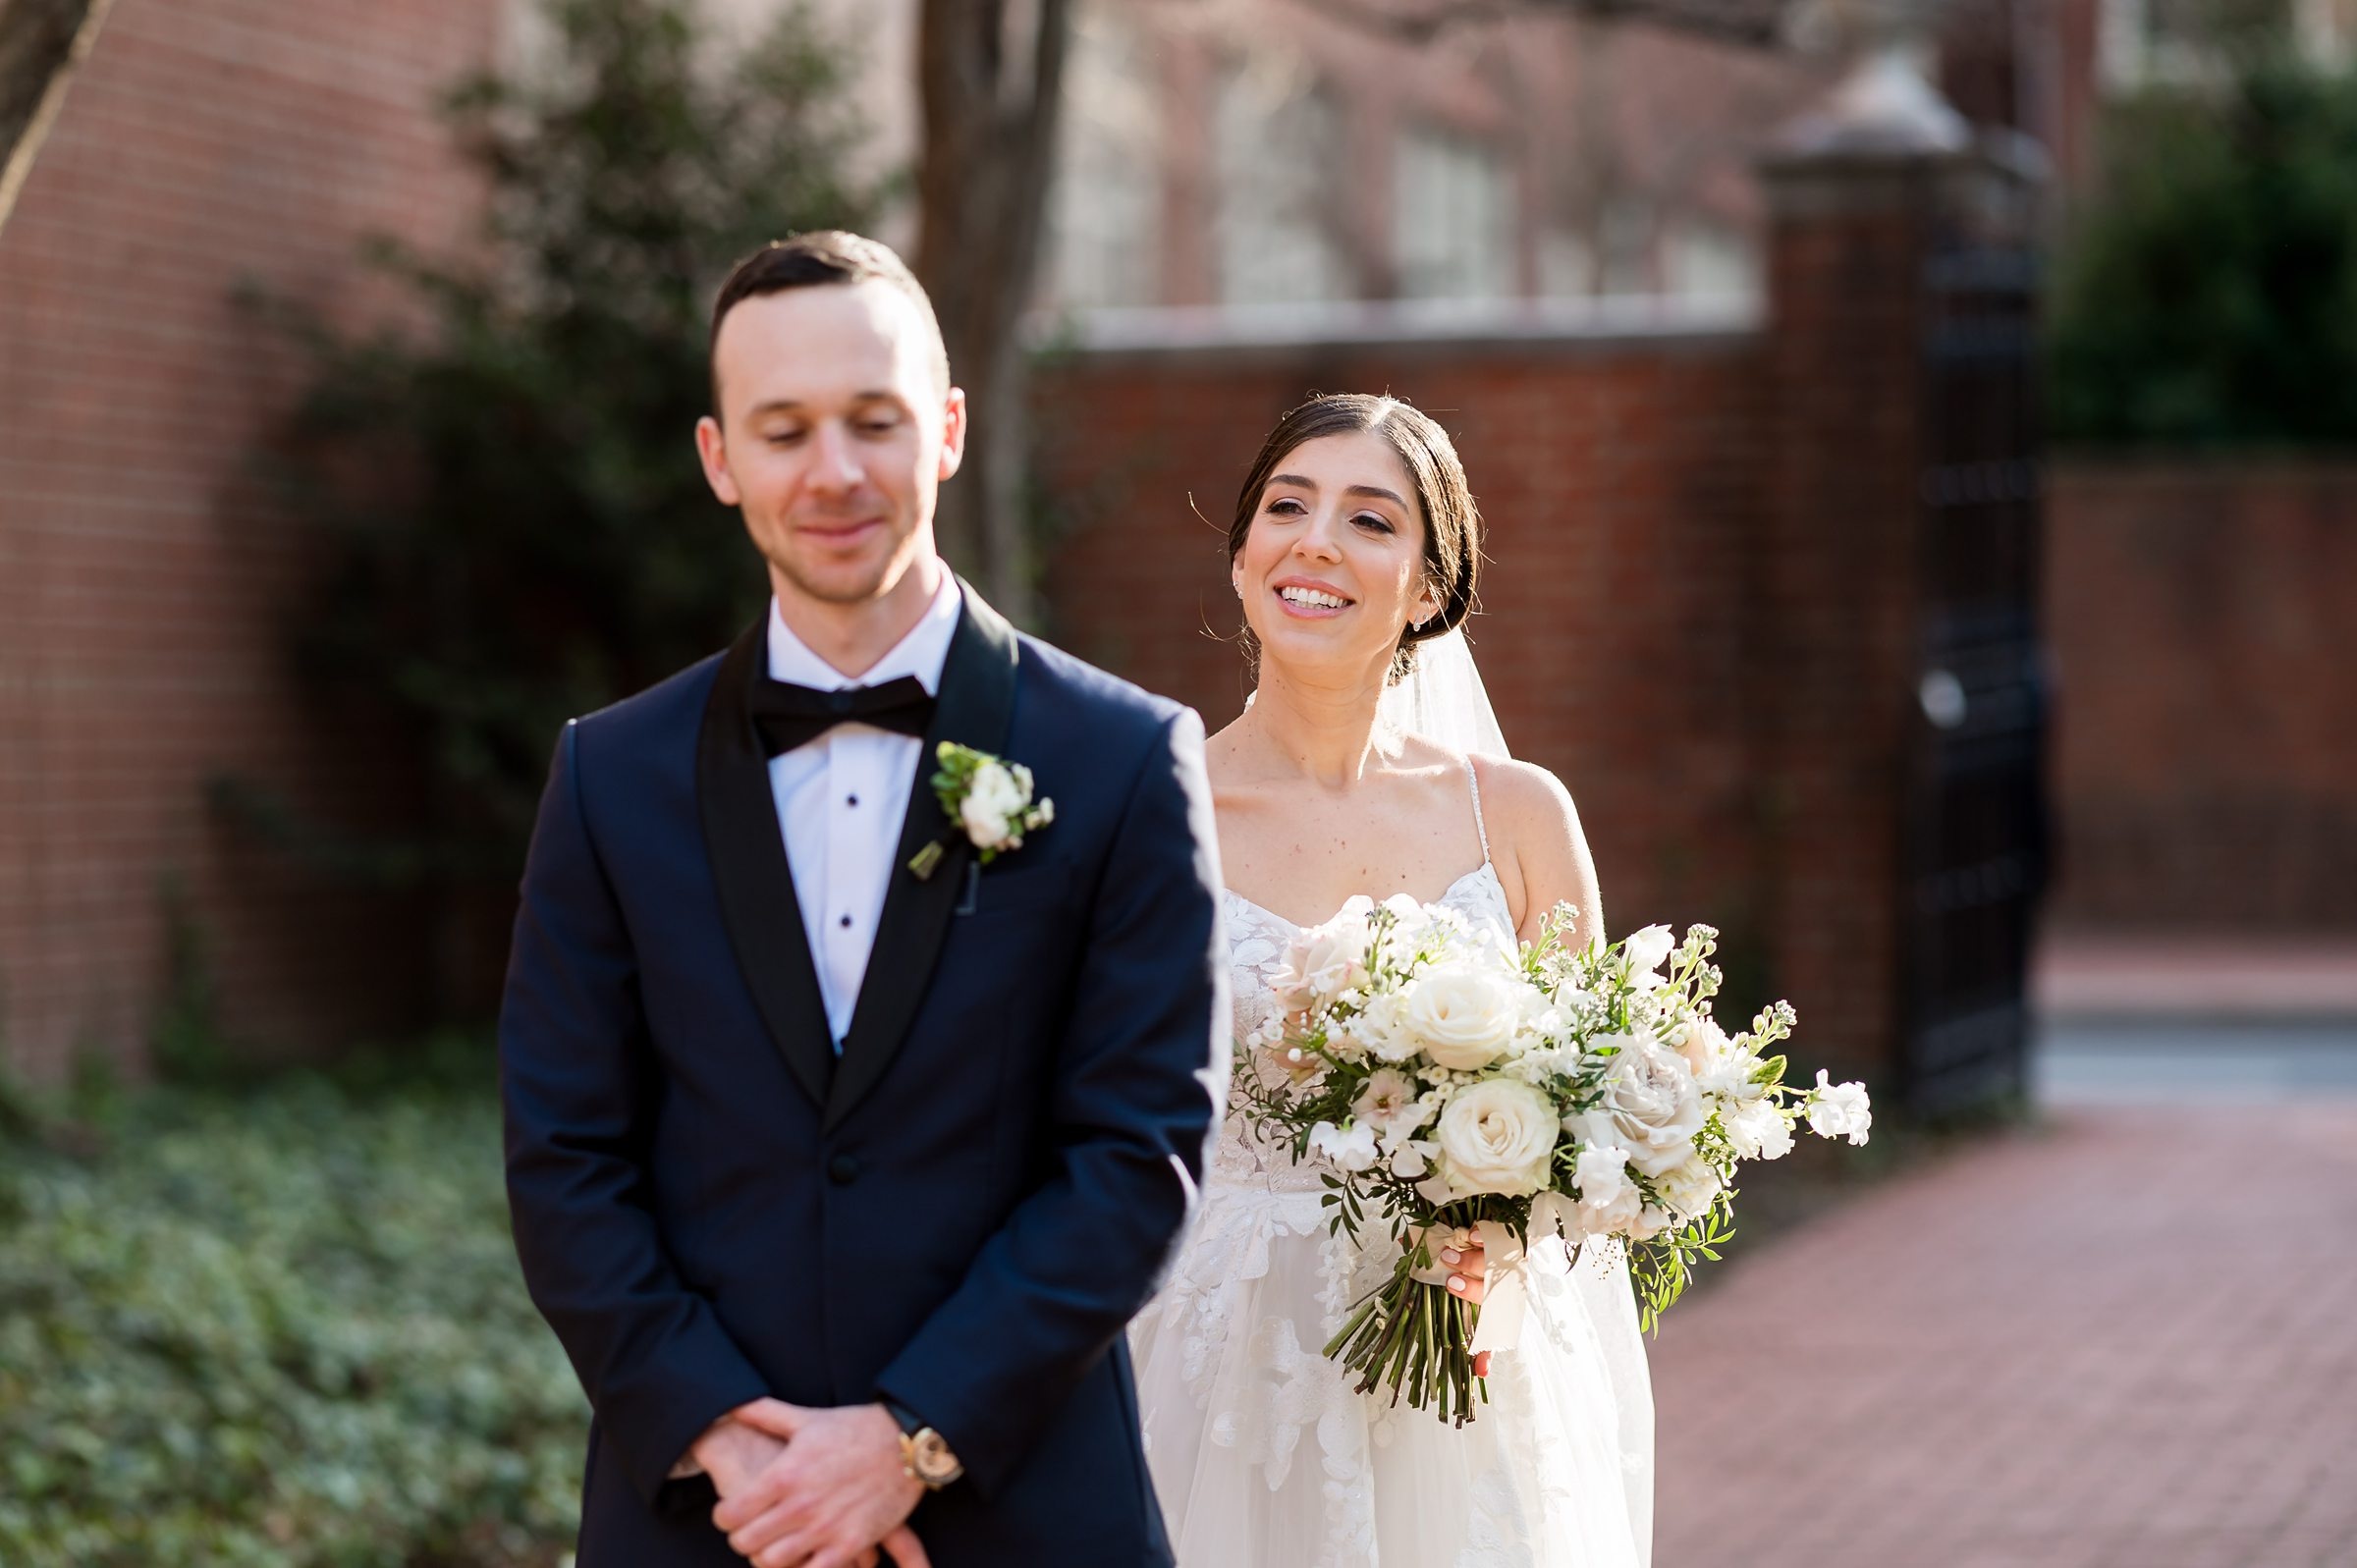 A bride and groom from Lilah Events smile as they walk down a brick walkway at their wedding.